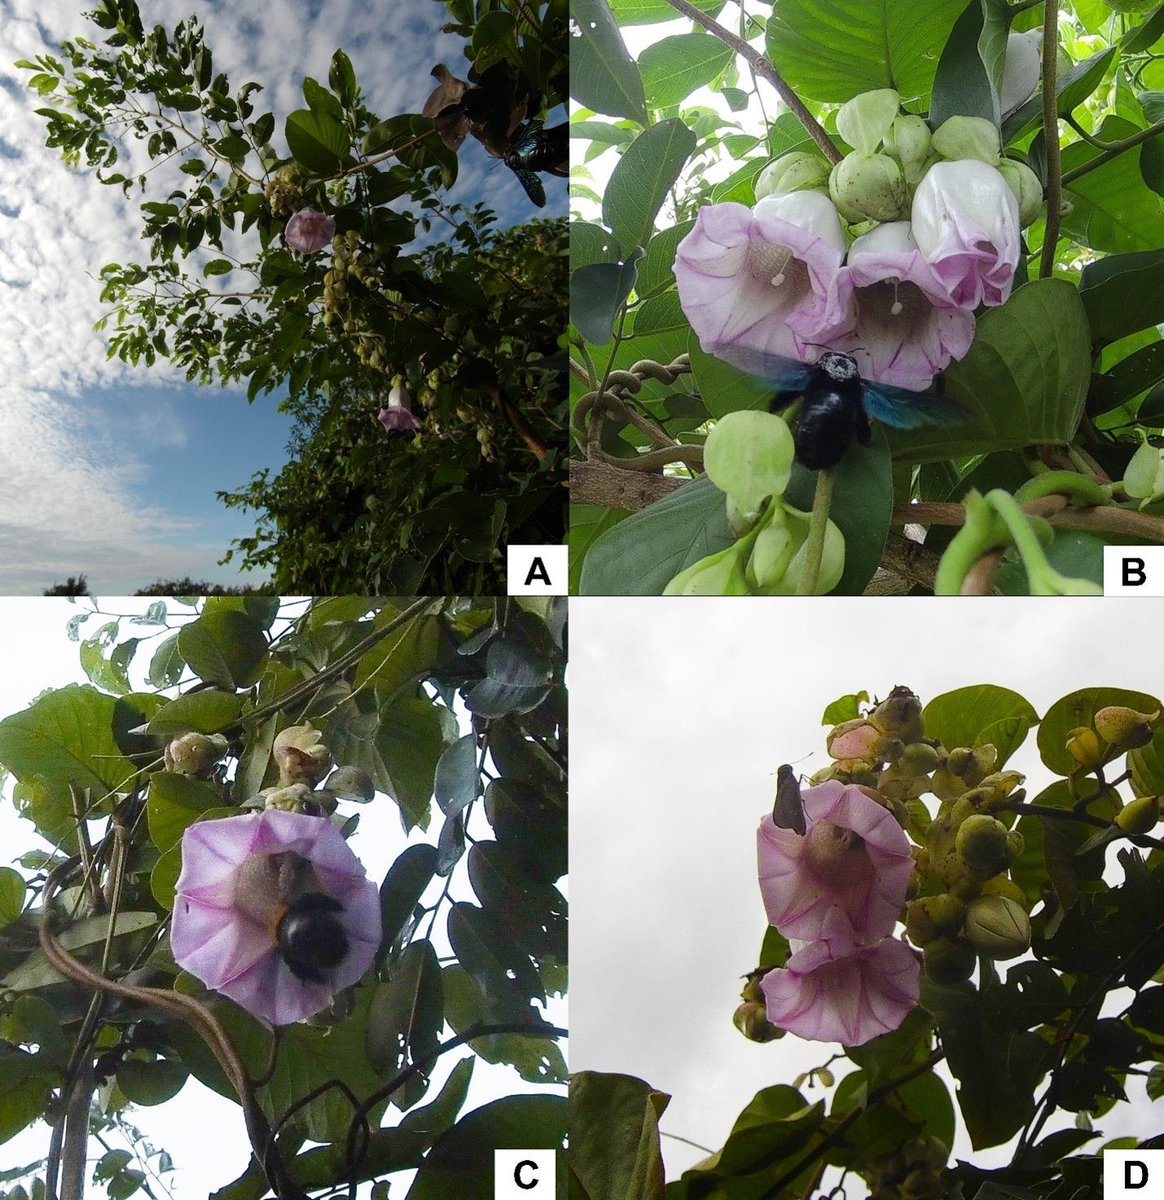 🌸 New article in @AoB_PLANTS on the breeding systems and pollinators of two extremely rare plant species, Argyreia versicolor and Argyreia mekongensis. Full #openaccess 👉 bit.ly/3wO6Lya #PlantScience #Botany